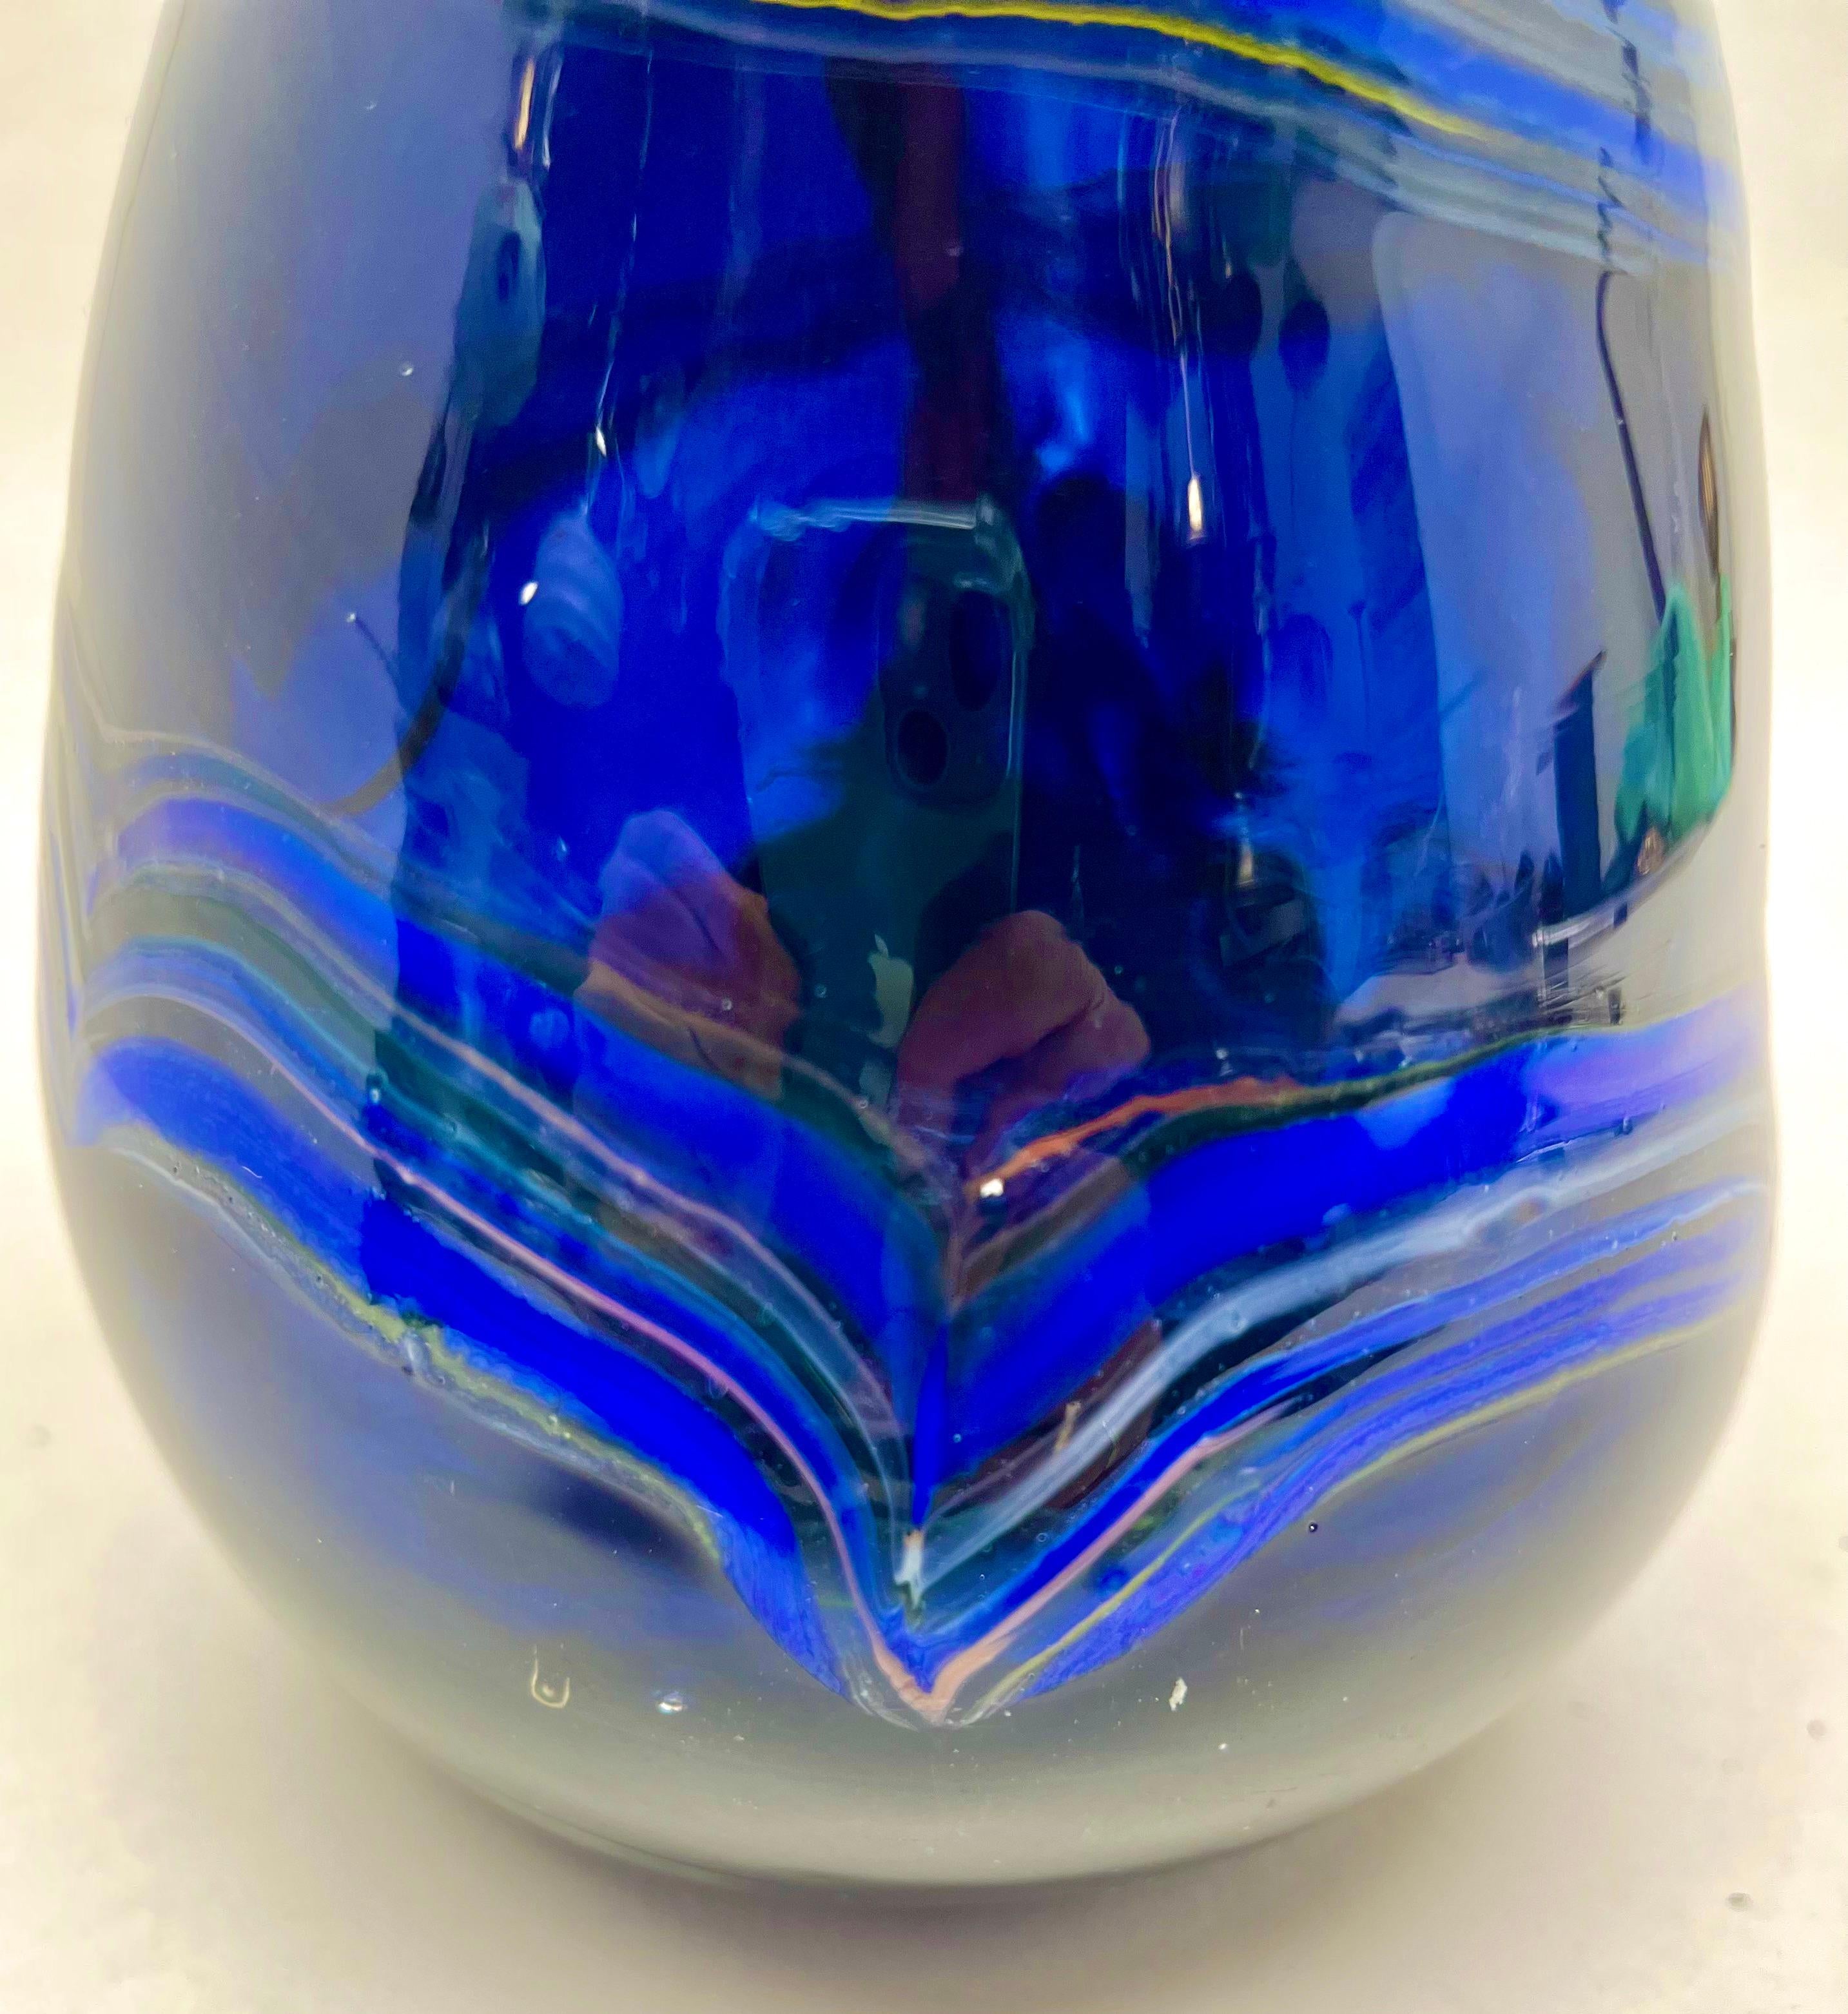 Mid-Century Modern Vsl Studio Glass Signed Vase with Embedded Color the Piece Is Unique